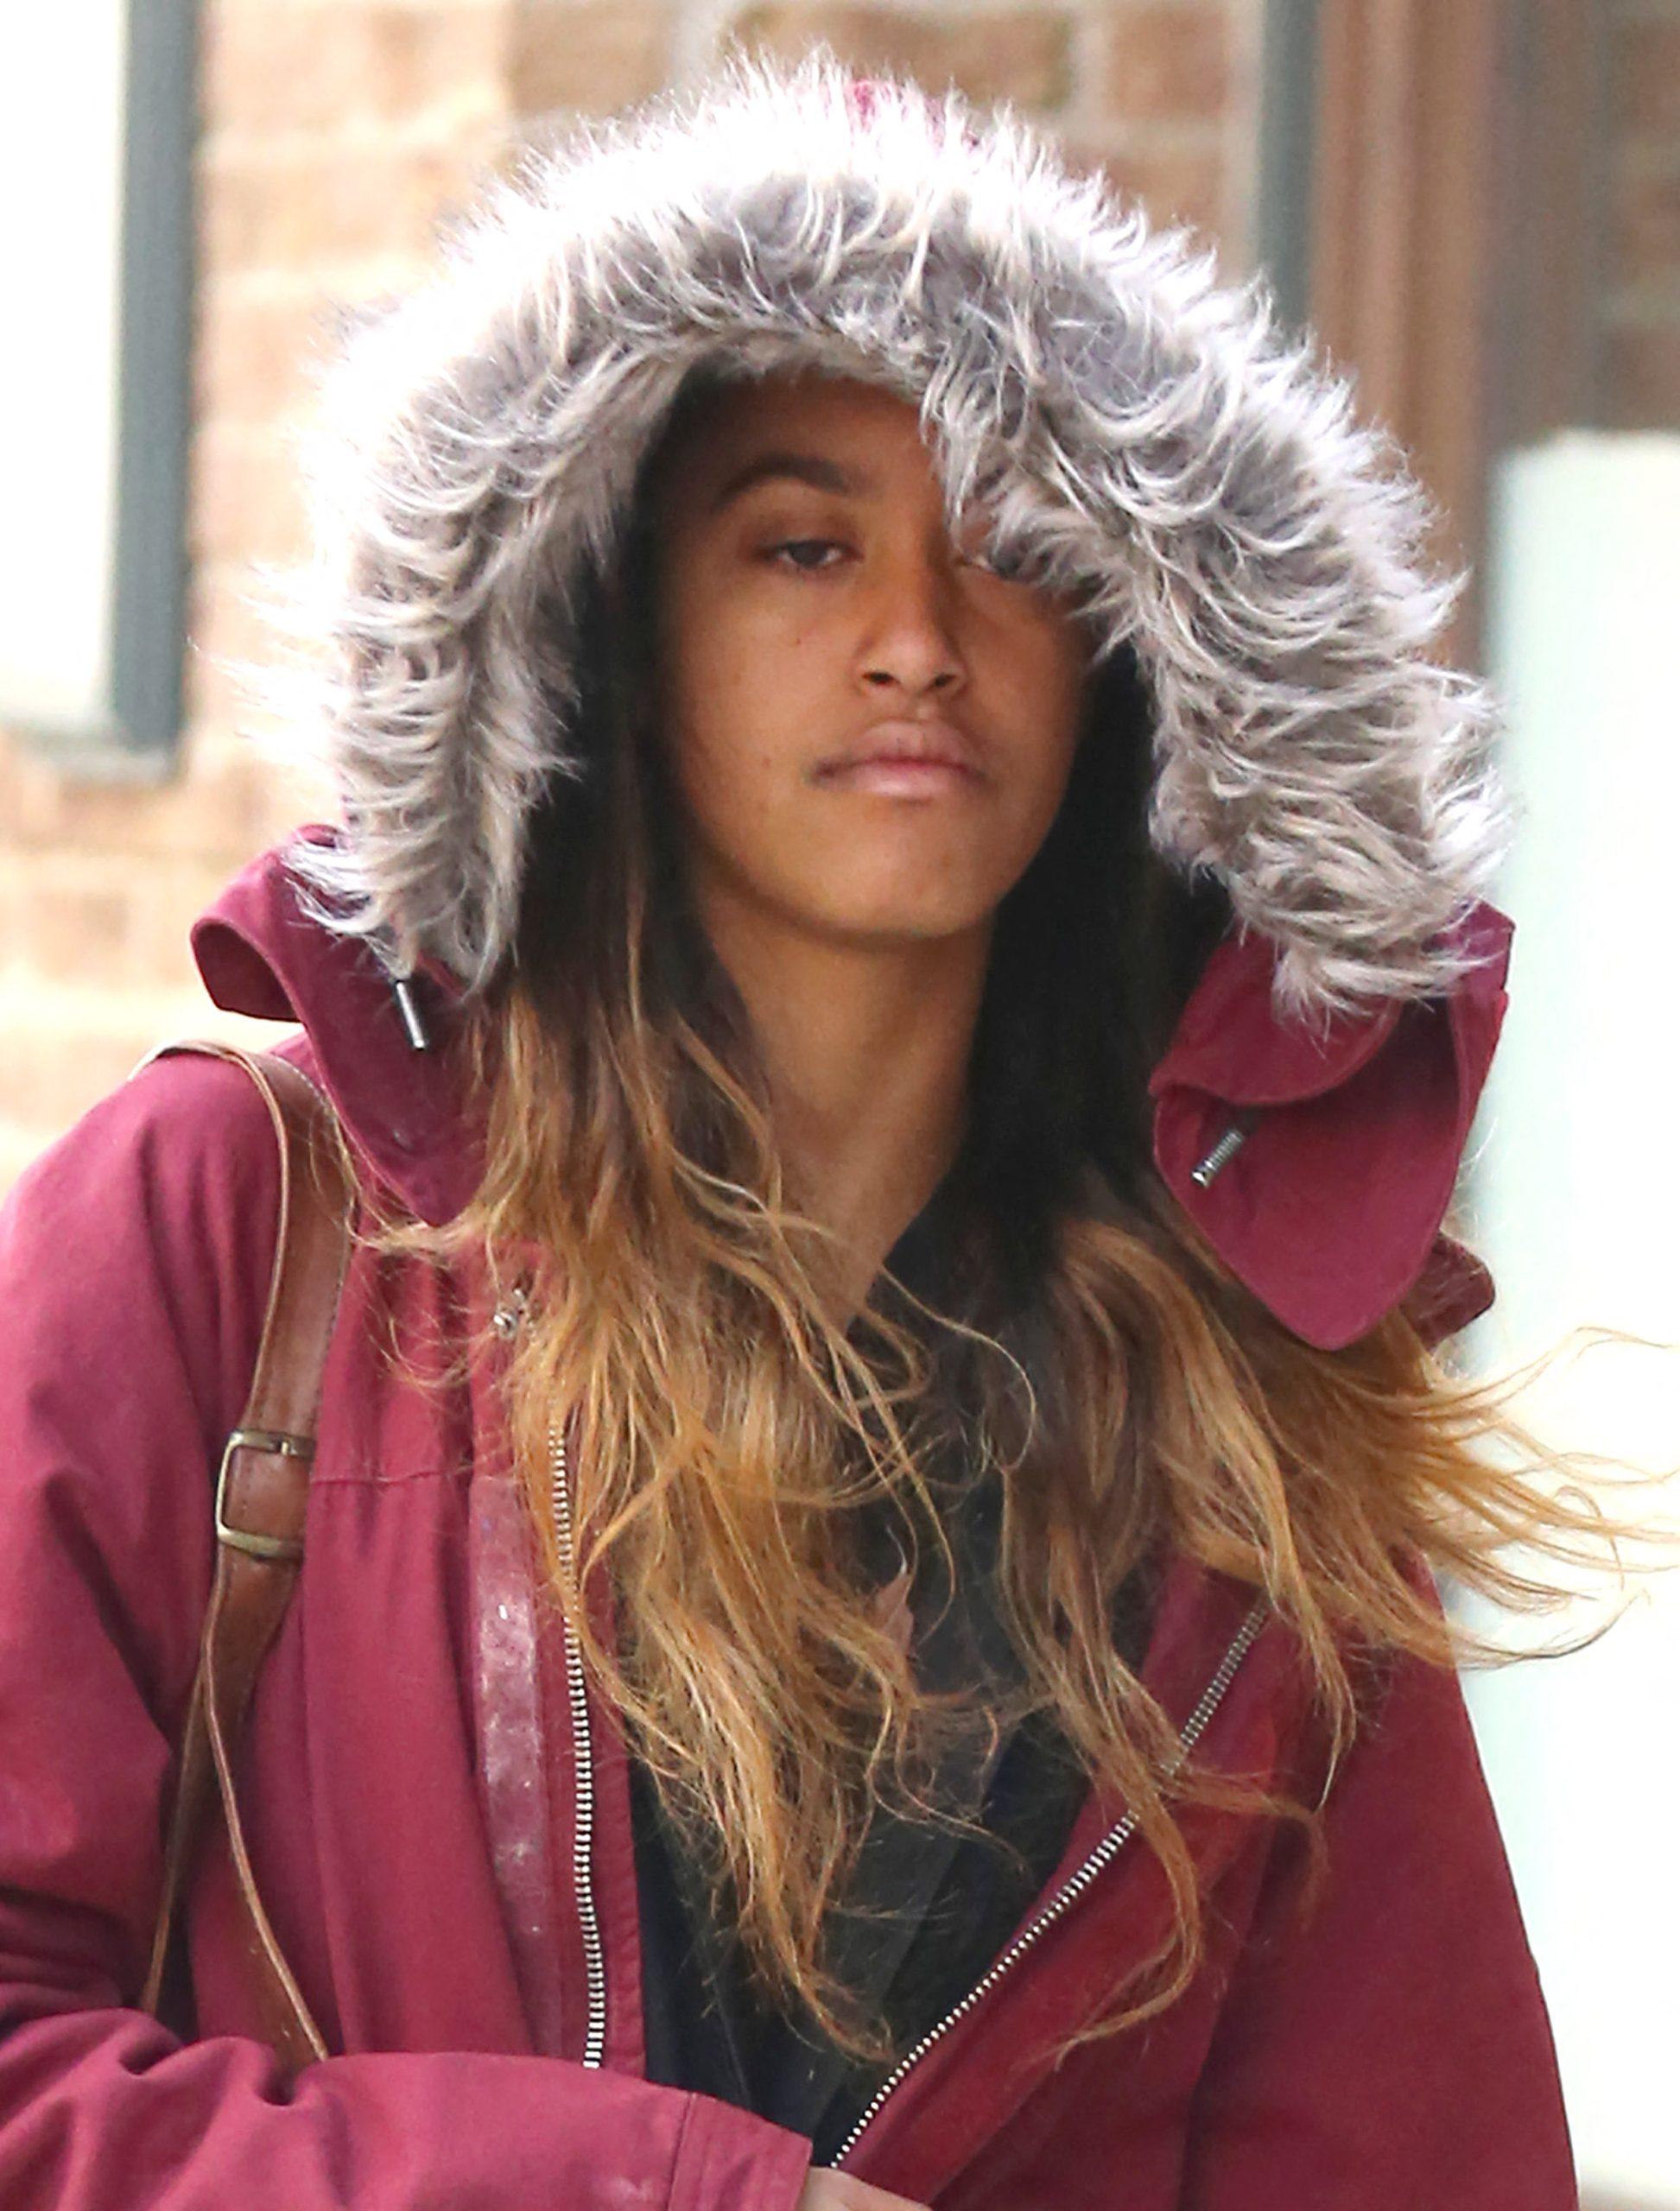 Malia Ann Obama out and about in New York City